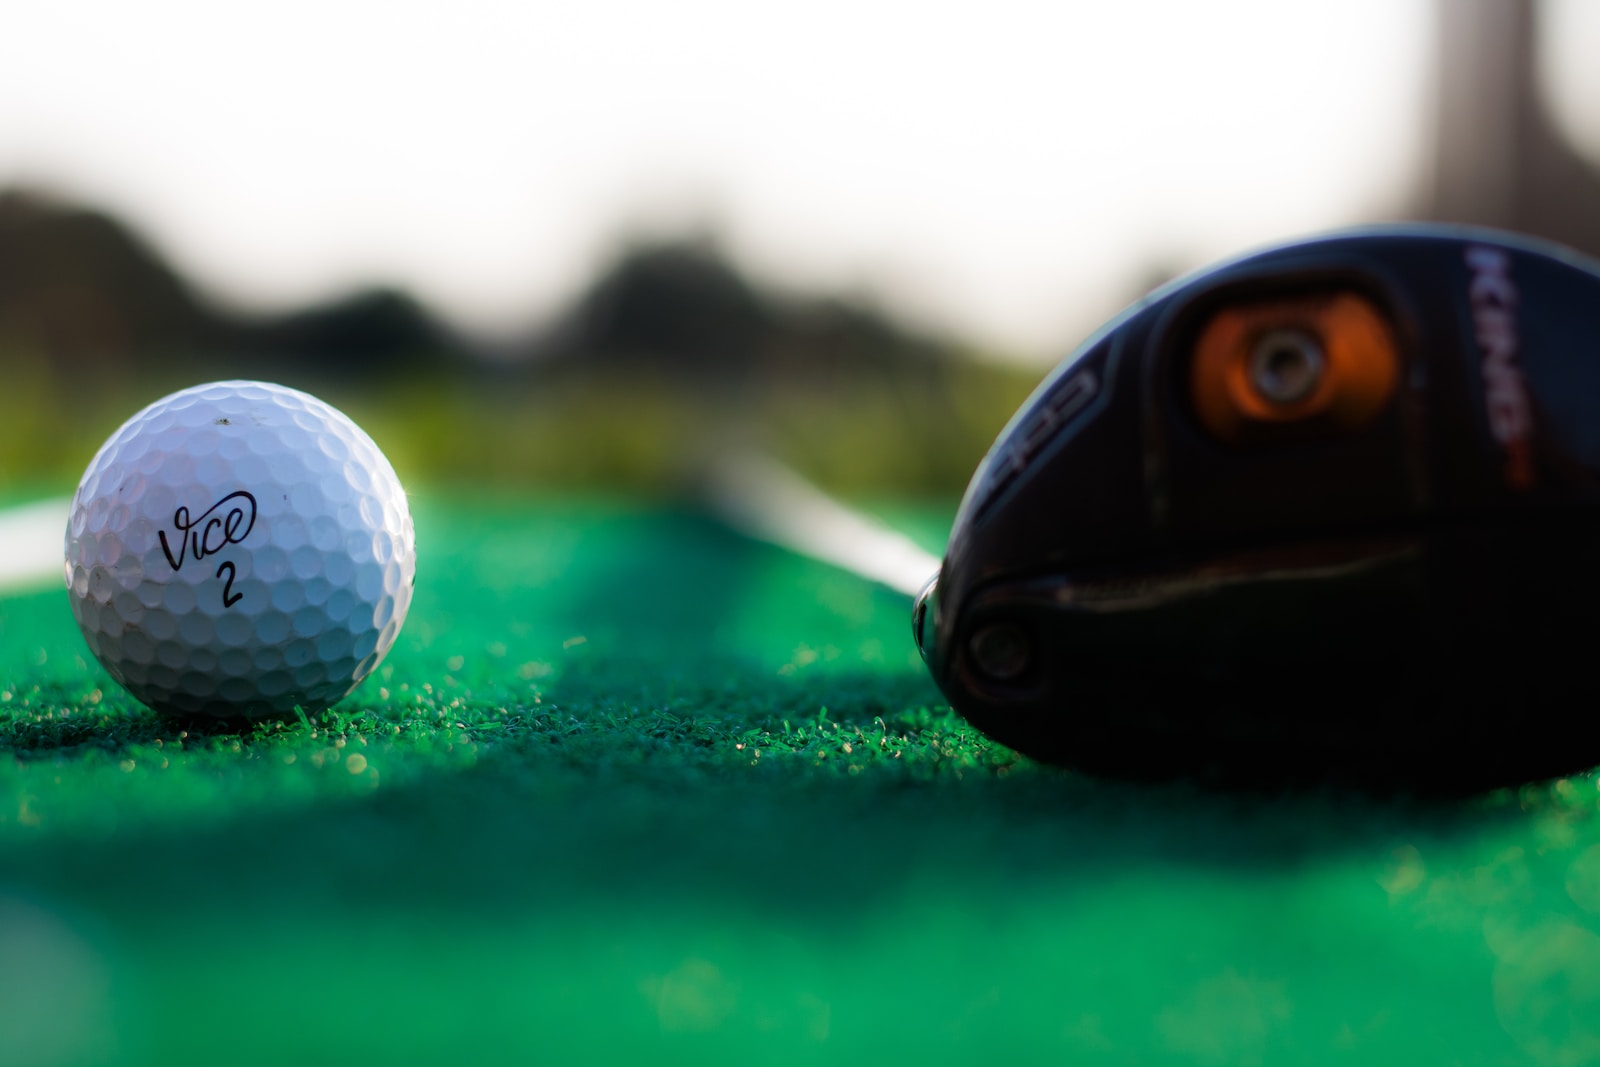 
Why Is Golf So Addictive? The Secrets Behind Its Unrivaled Popularity